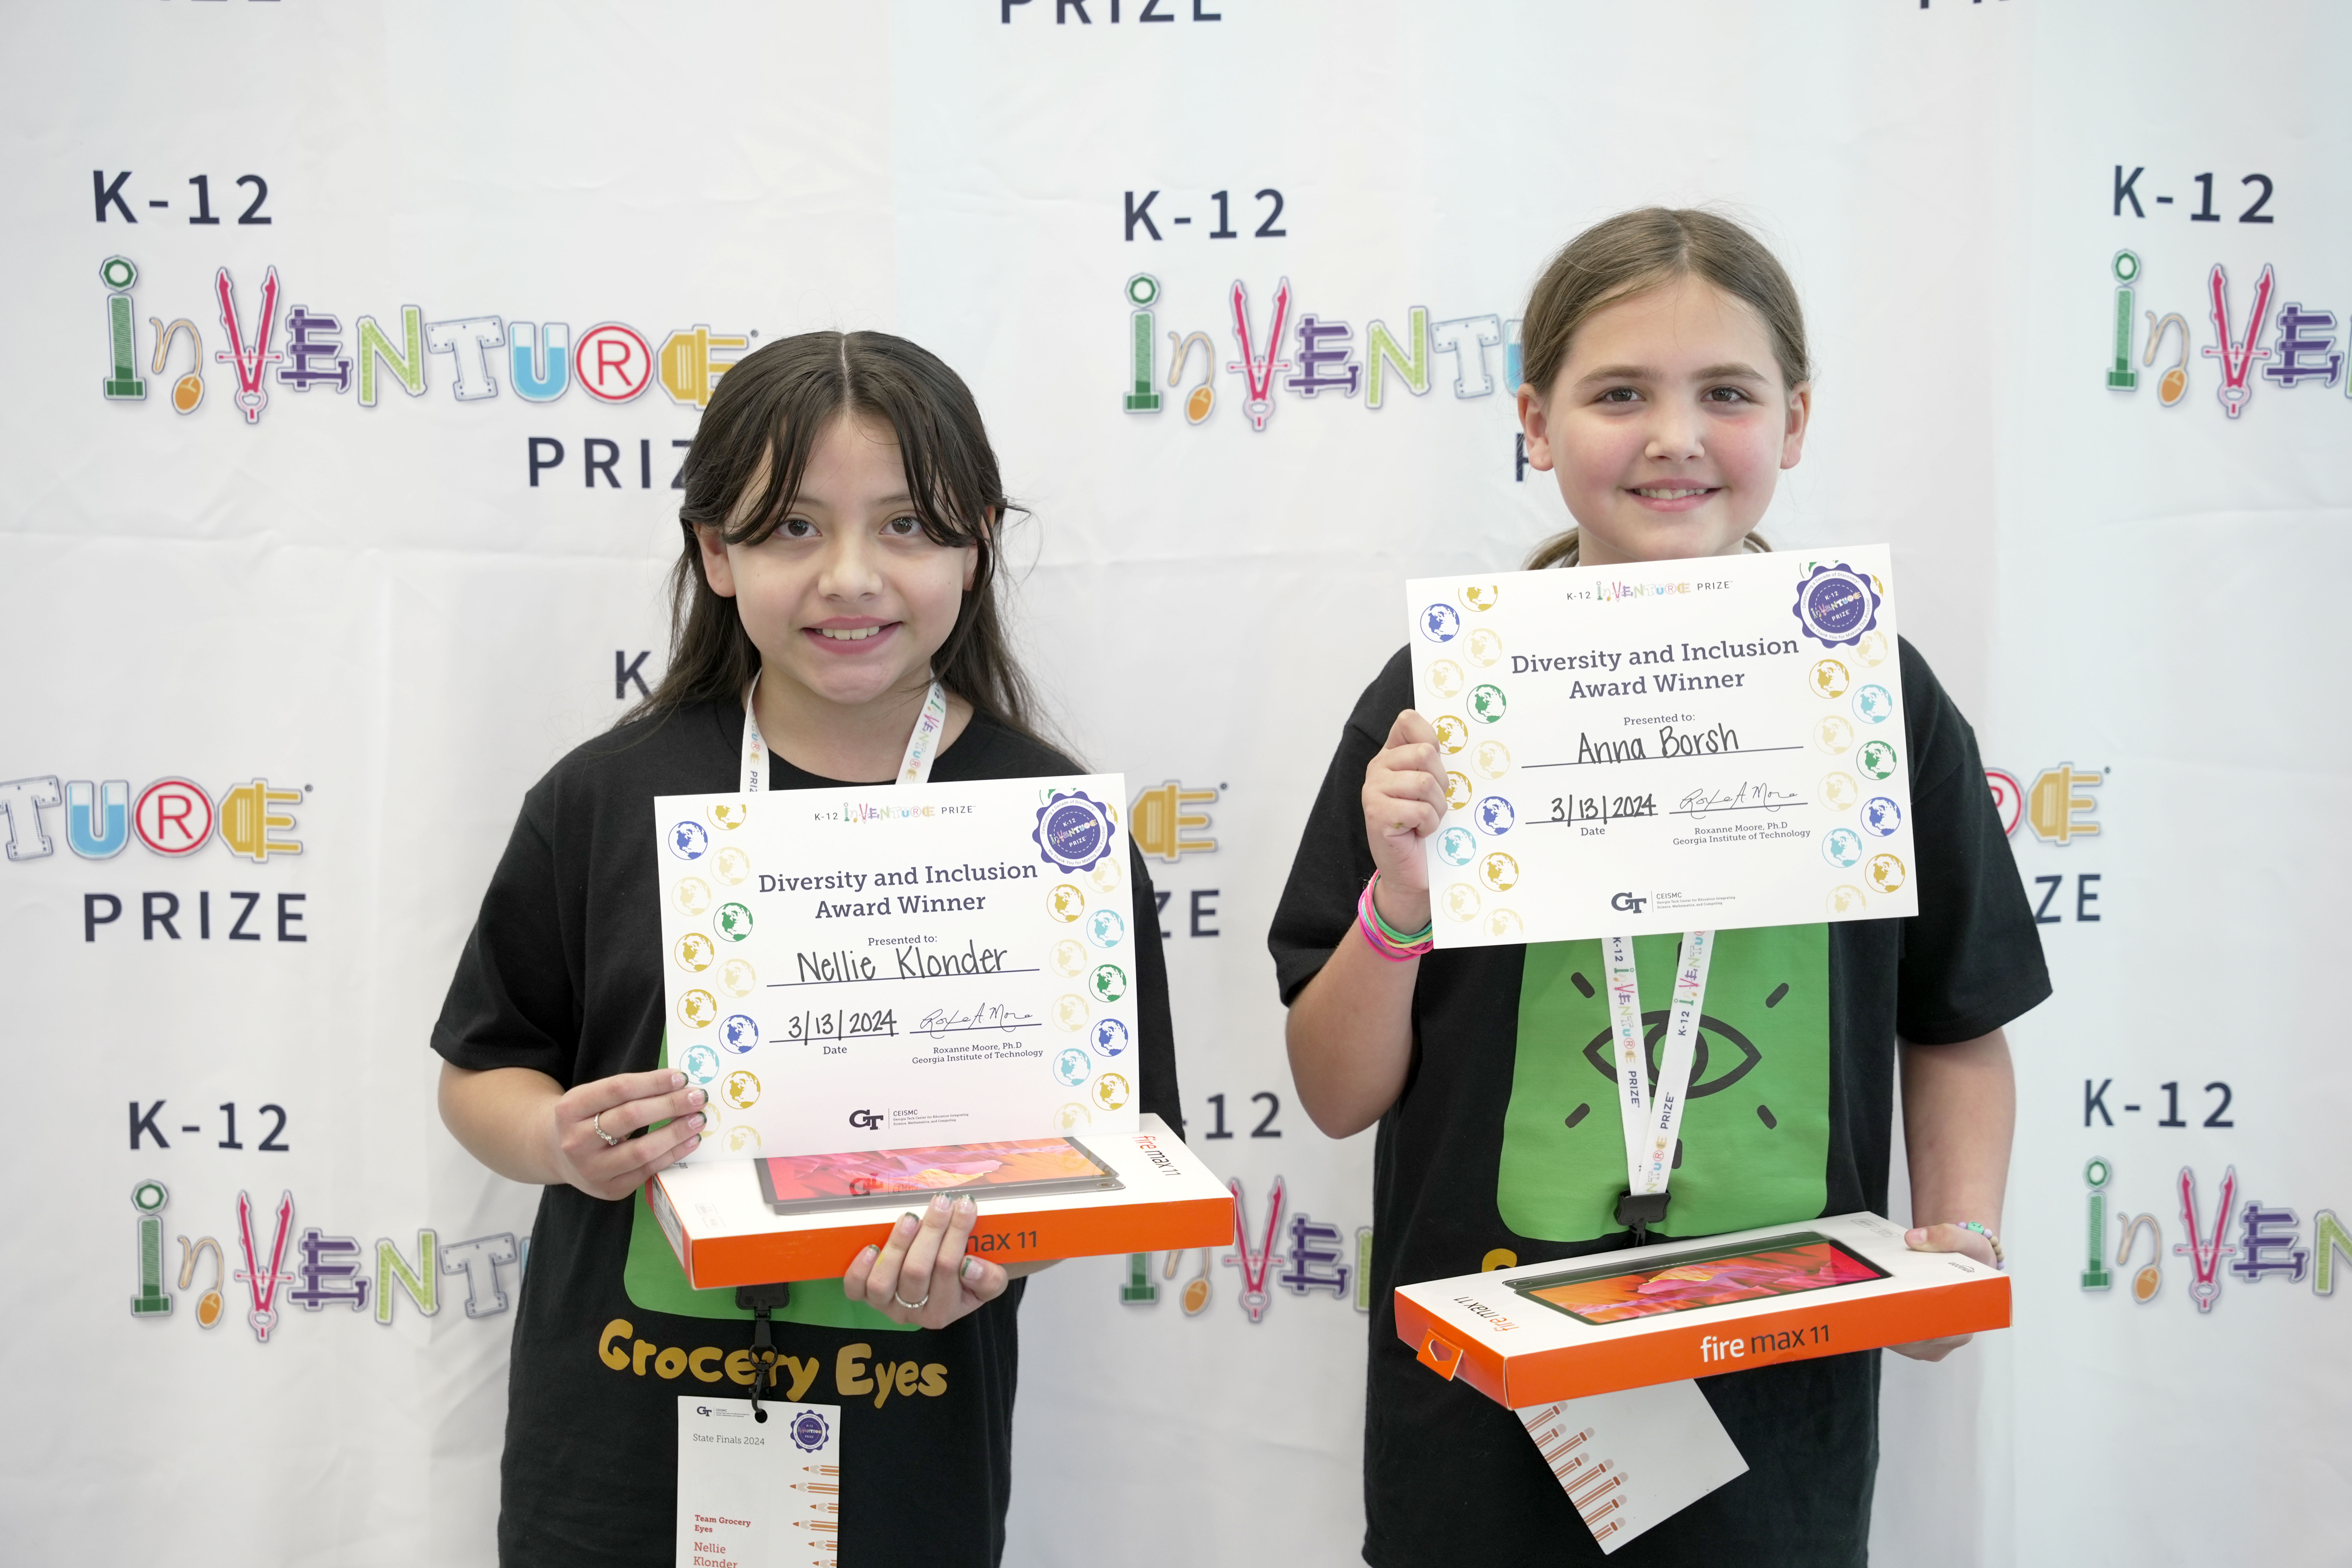 Two smiling students holding certificates and prizes